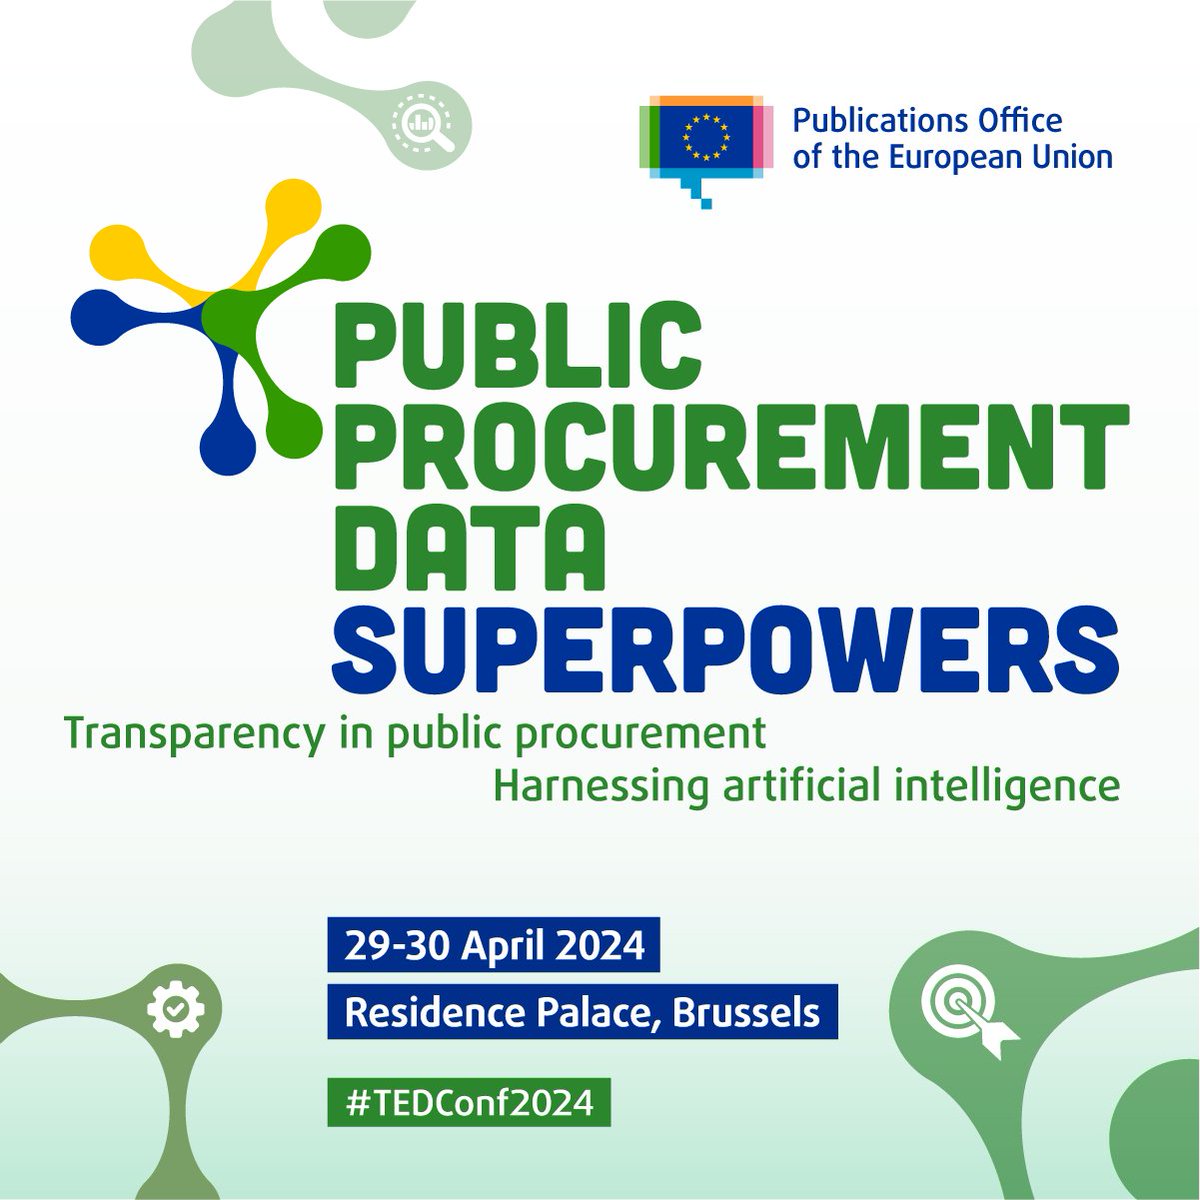 Today we're at the #TEDConf2024 on 'Public Procurement Data Superpowers: Transparency in #publicprocurement –Harnessing #AI' Don't miss our Head of Europe @Granickas & other great panelists sharing insights from the frontlines of Europe's digital procurement transformation @ 4PM